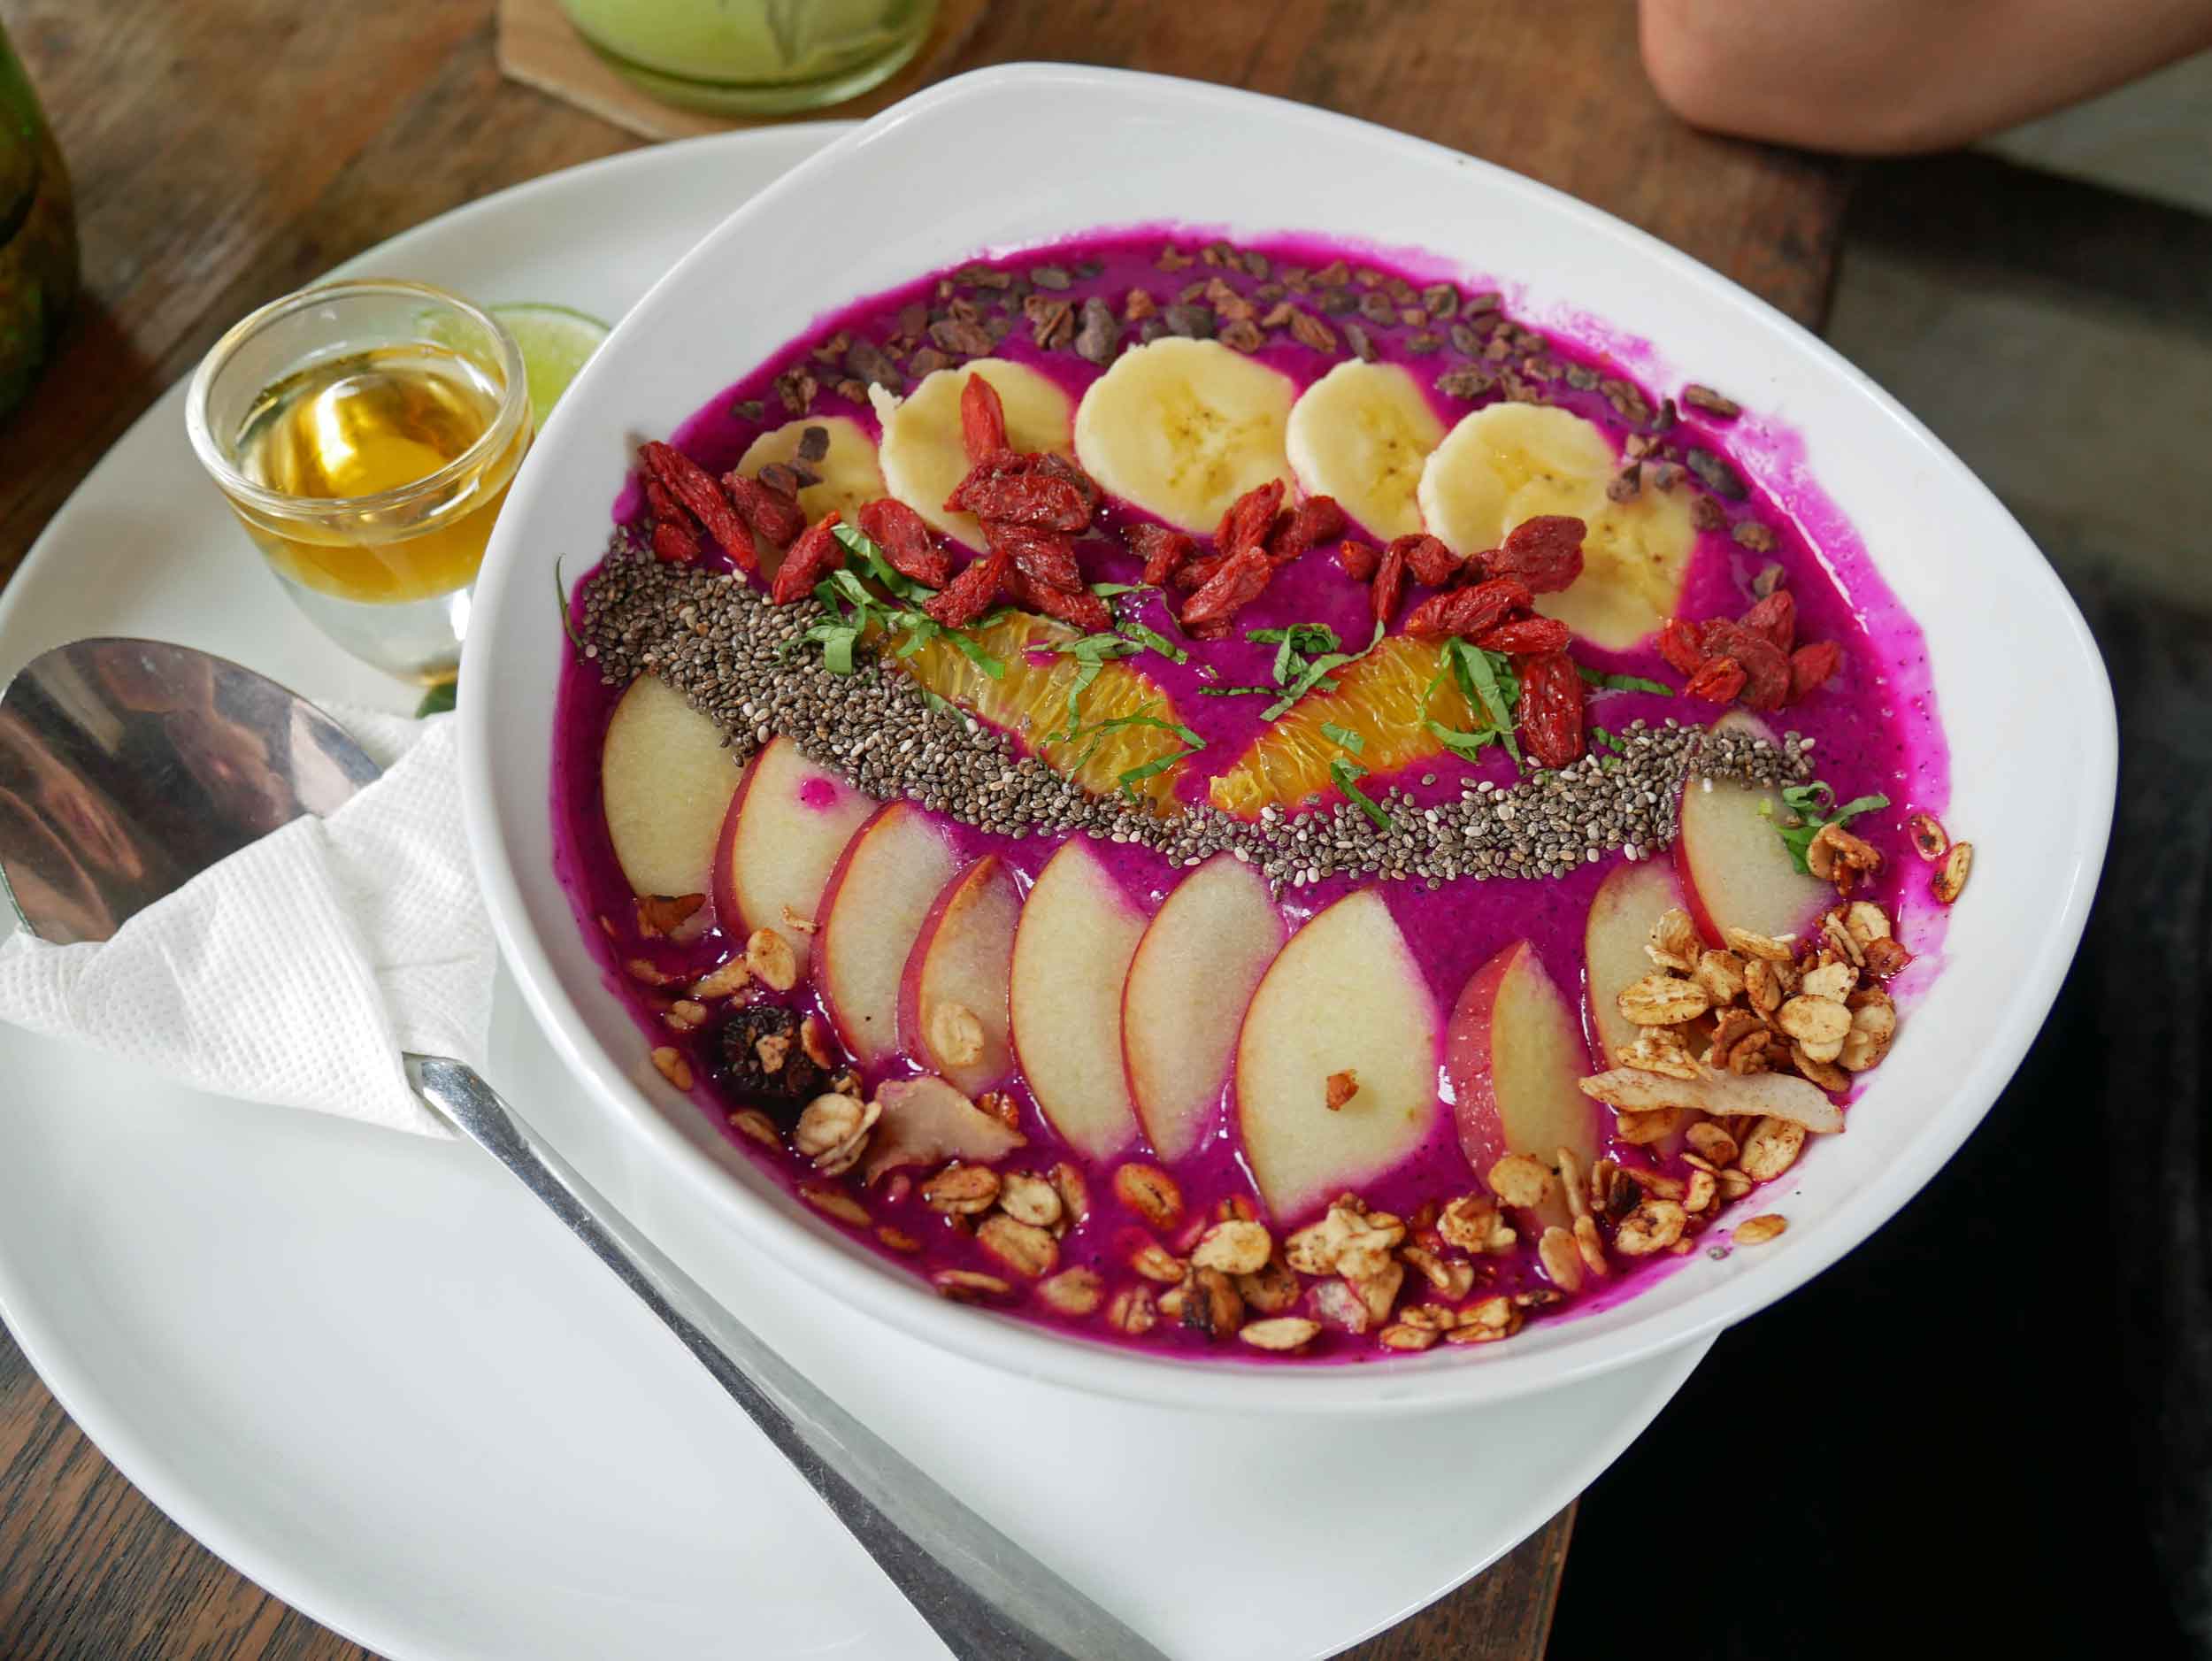  But also plenty of healthy food, like this vibrant dragonfruit smoothie bowl, which quickly became David's favorite snack.&nbsp; 